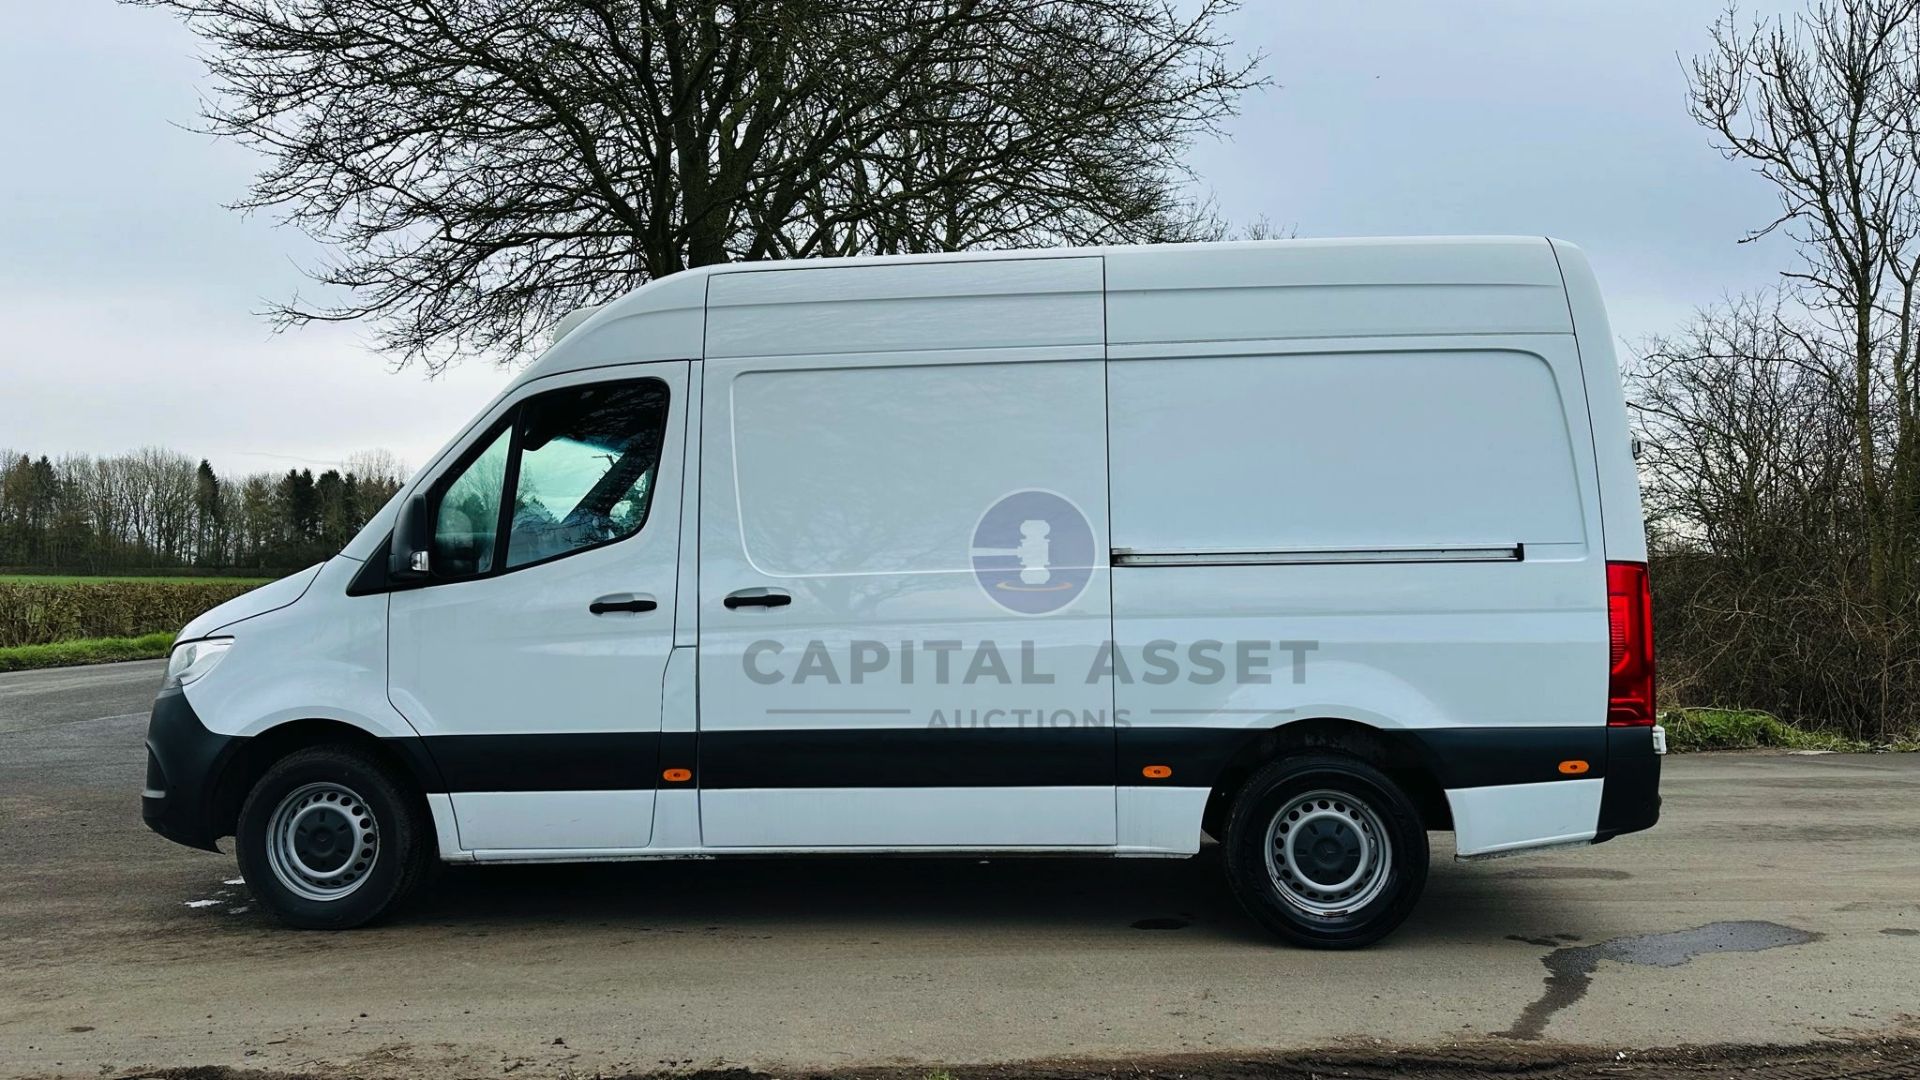 MERCEDES-BENZ SPRINTER 314 CDI *MWB - REFRIGERATED VAN* (2019 - FACELIFT MODEL) *OVERNIGHT STANDBY* - Image 10 of 41